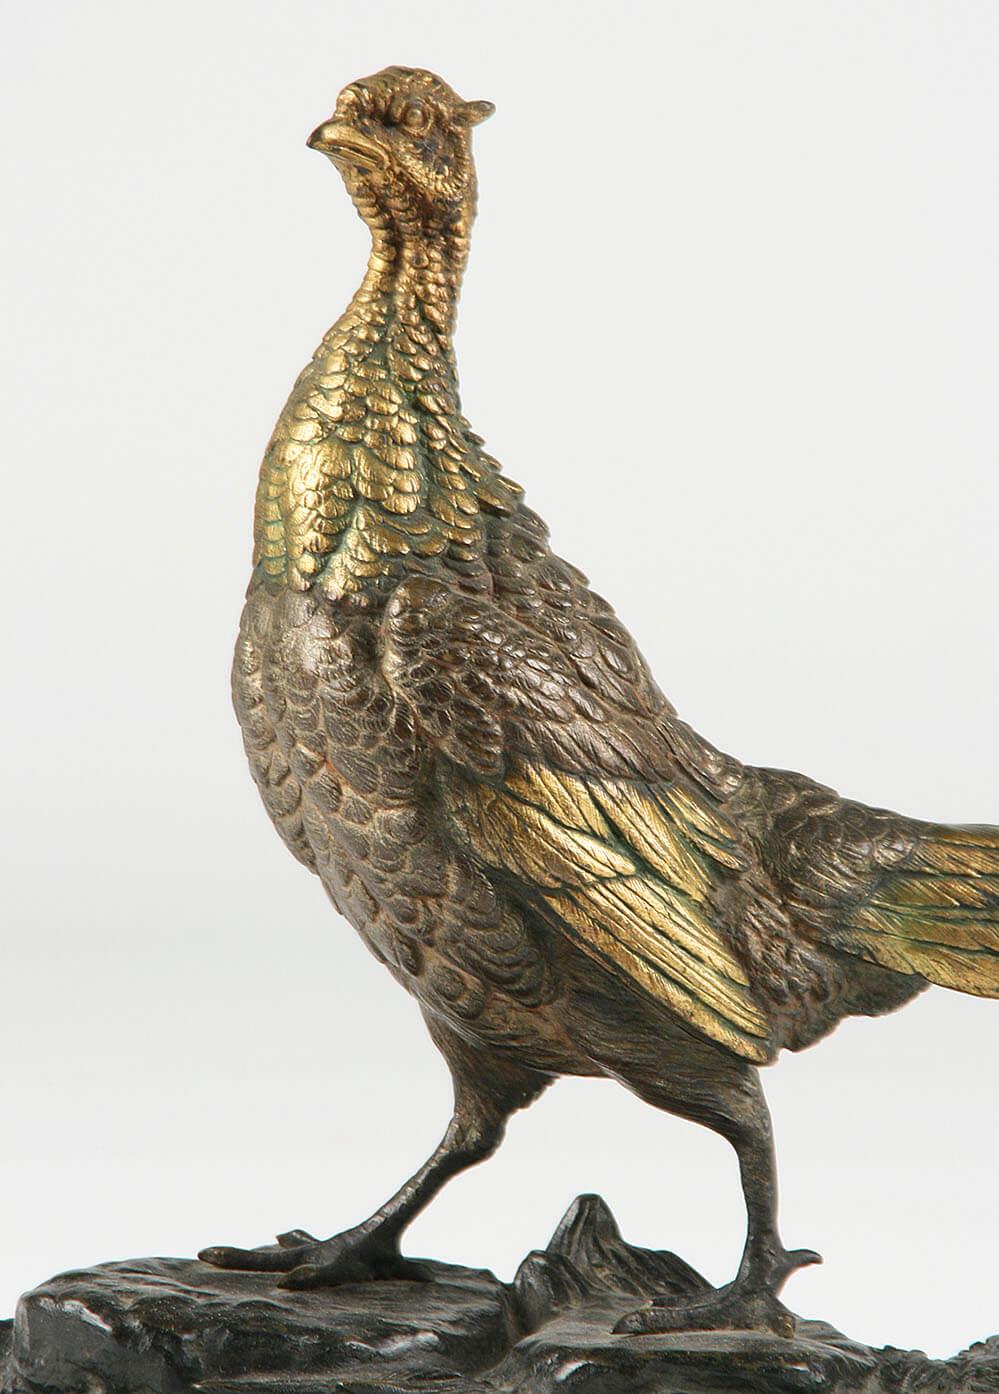 Beautiful antique bronze sculpture of a pheasant on a black marble base. The bronze is beautifully refined and patinated in different colors. The statue is marked 'E. Delabriere' on the base.
Edouard Paul Delabriere was a French sculptor who lived